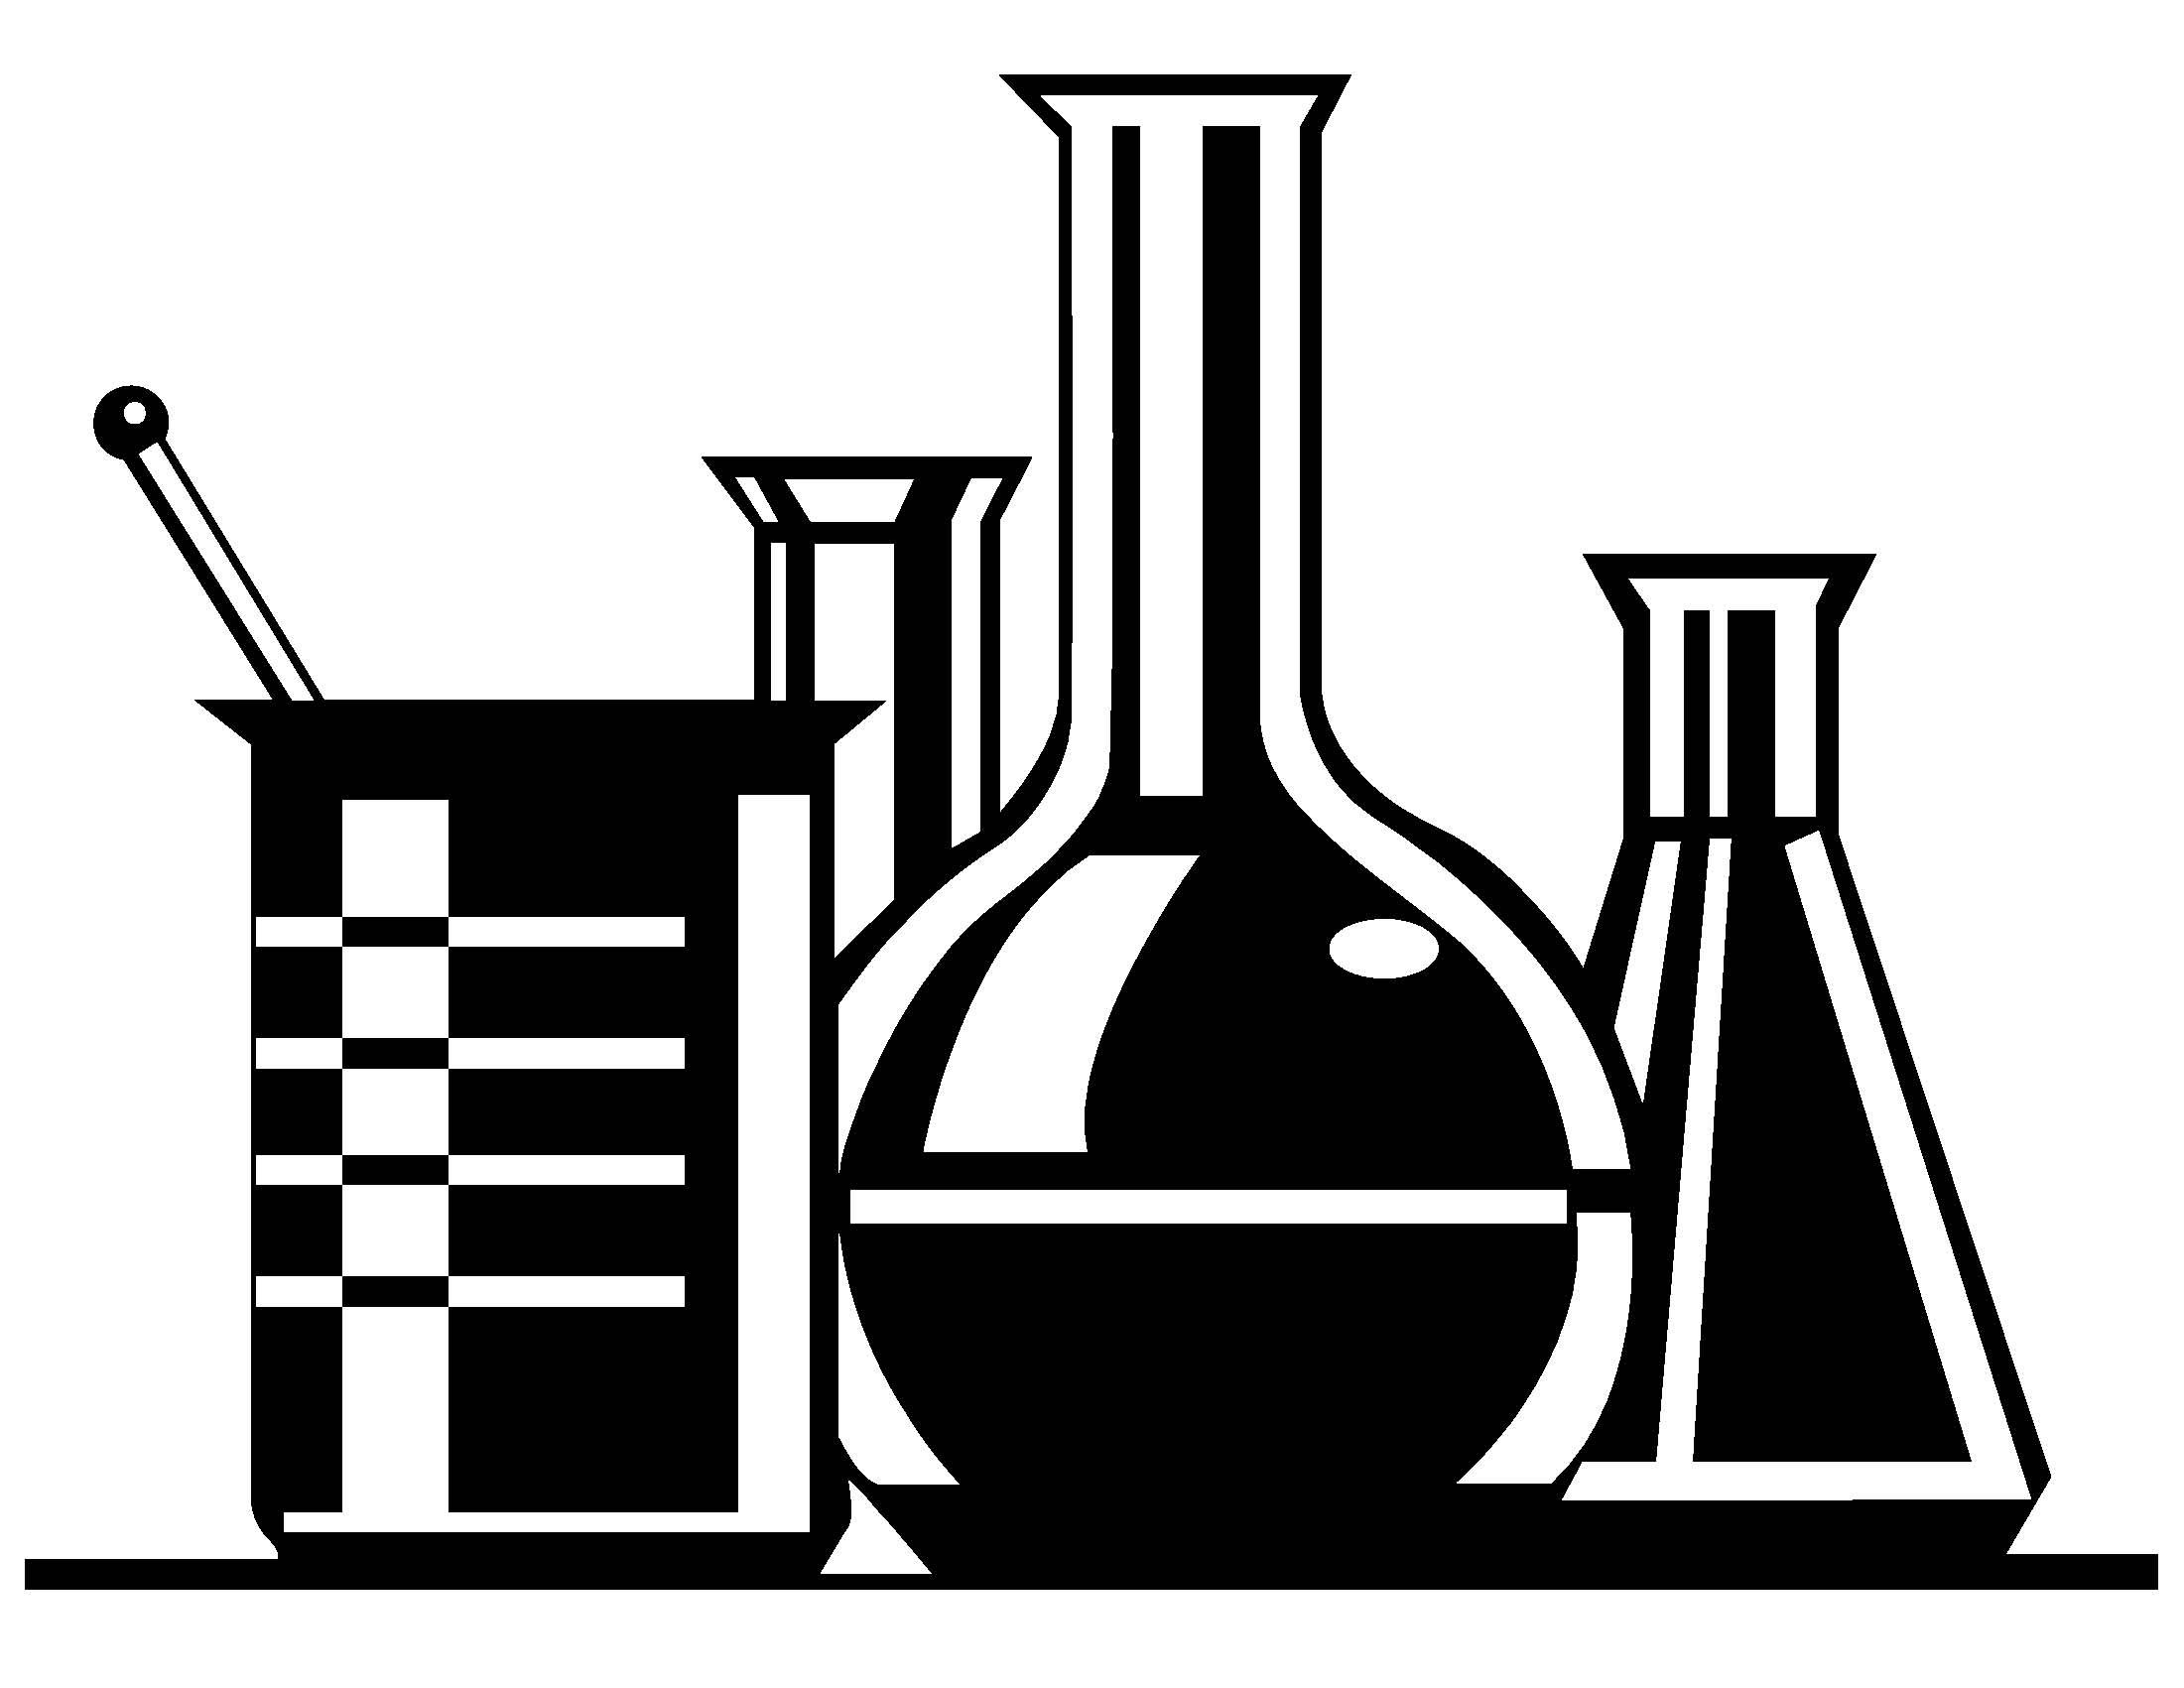 beakers clipart black and white